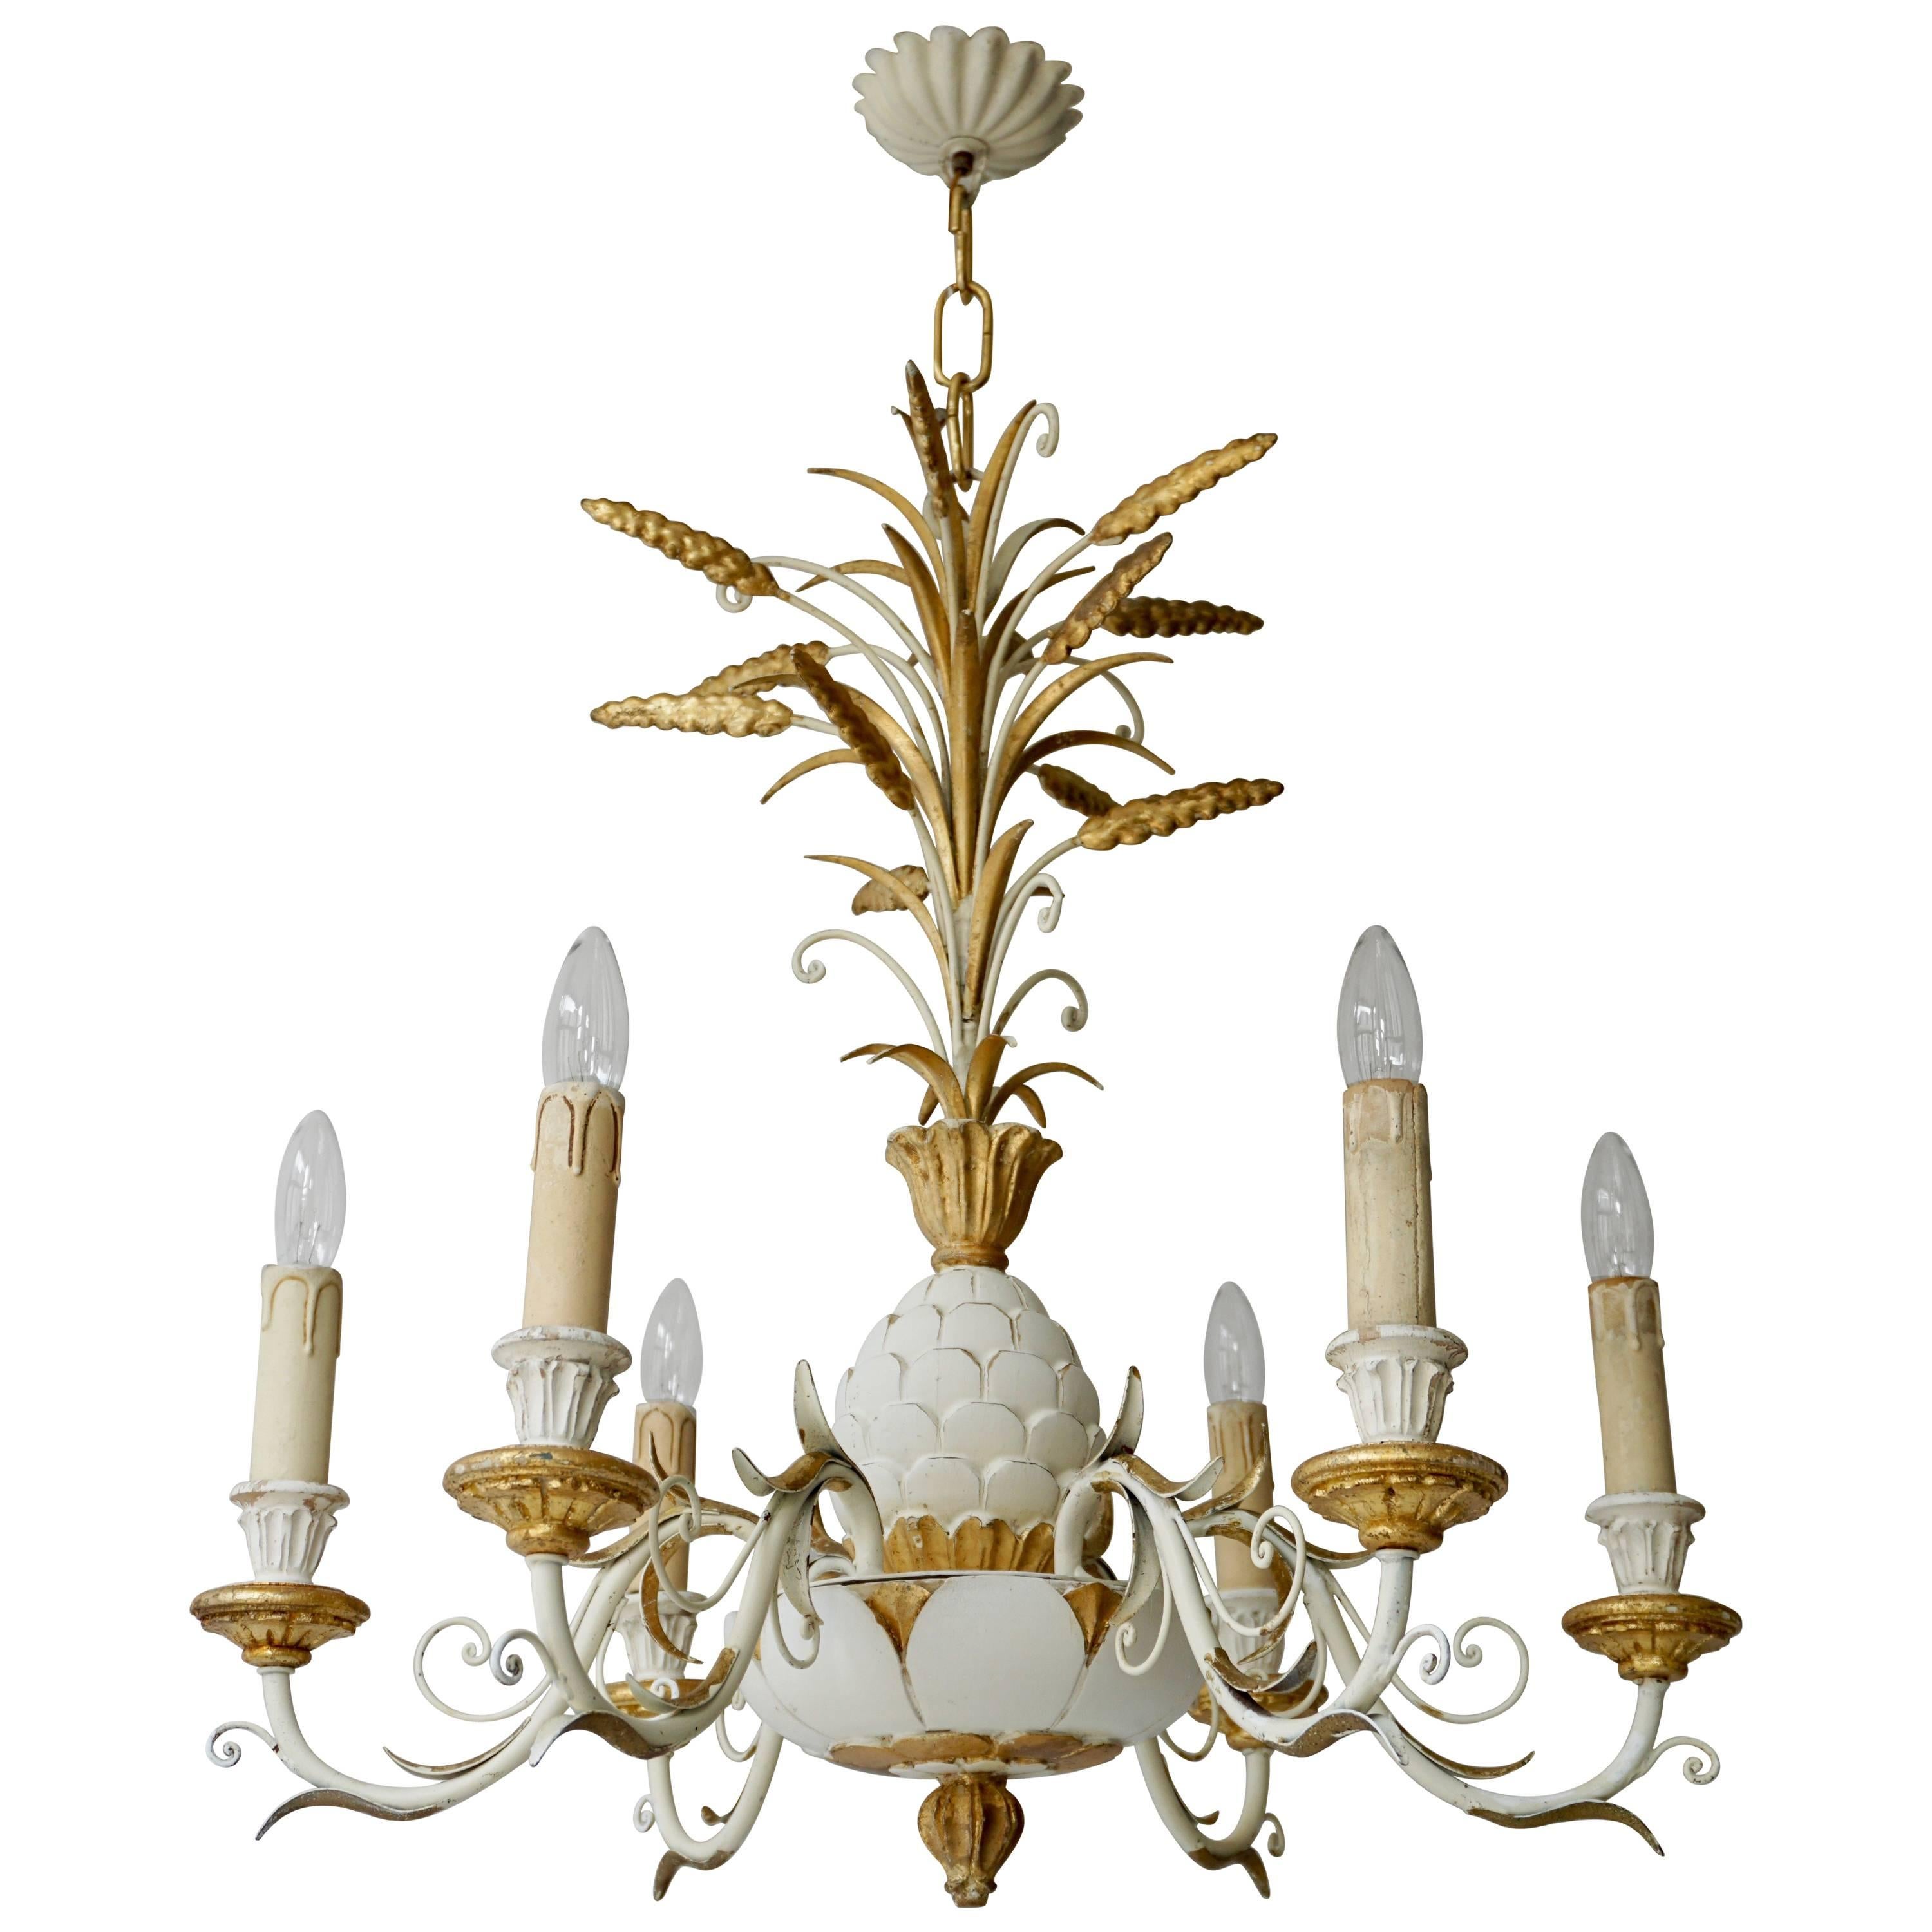 1950s Carved Giltwood Italian Gold and White Pineapple Chandelier